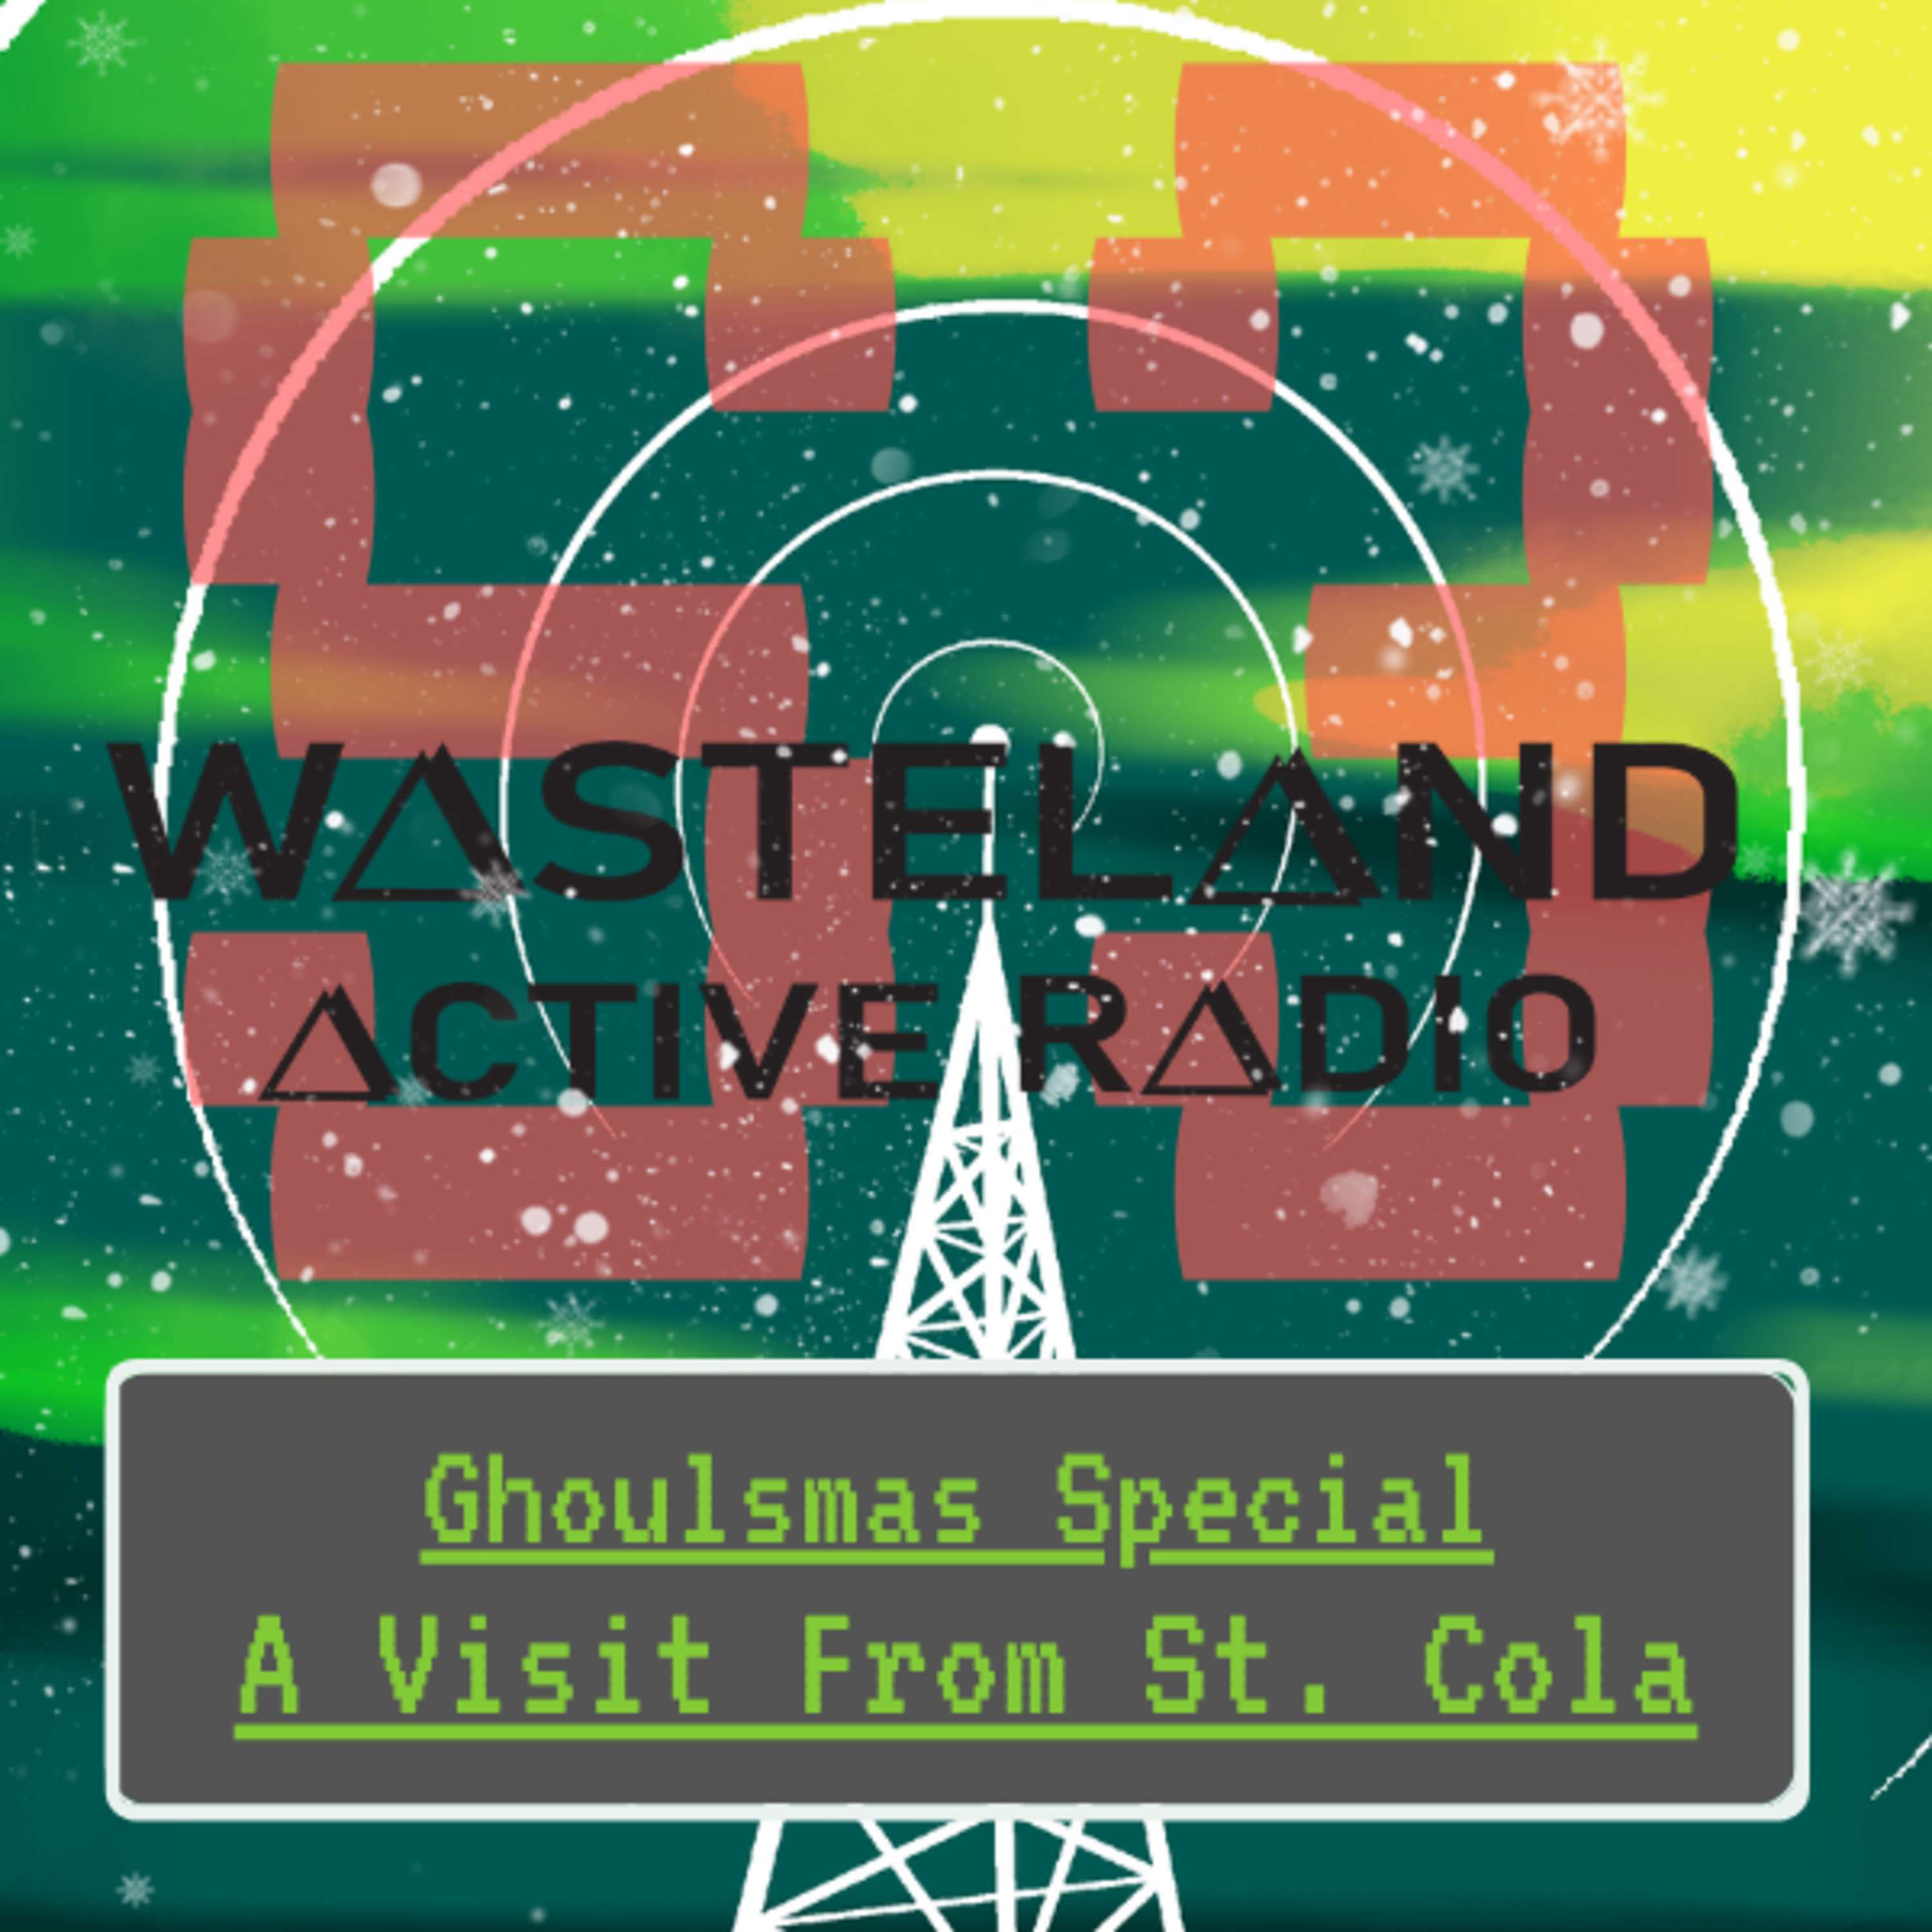 WARR Ghoulsmas Special: A Visit From St. Cola